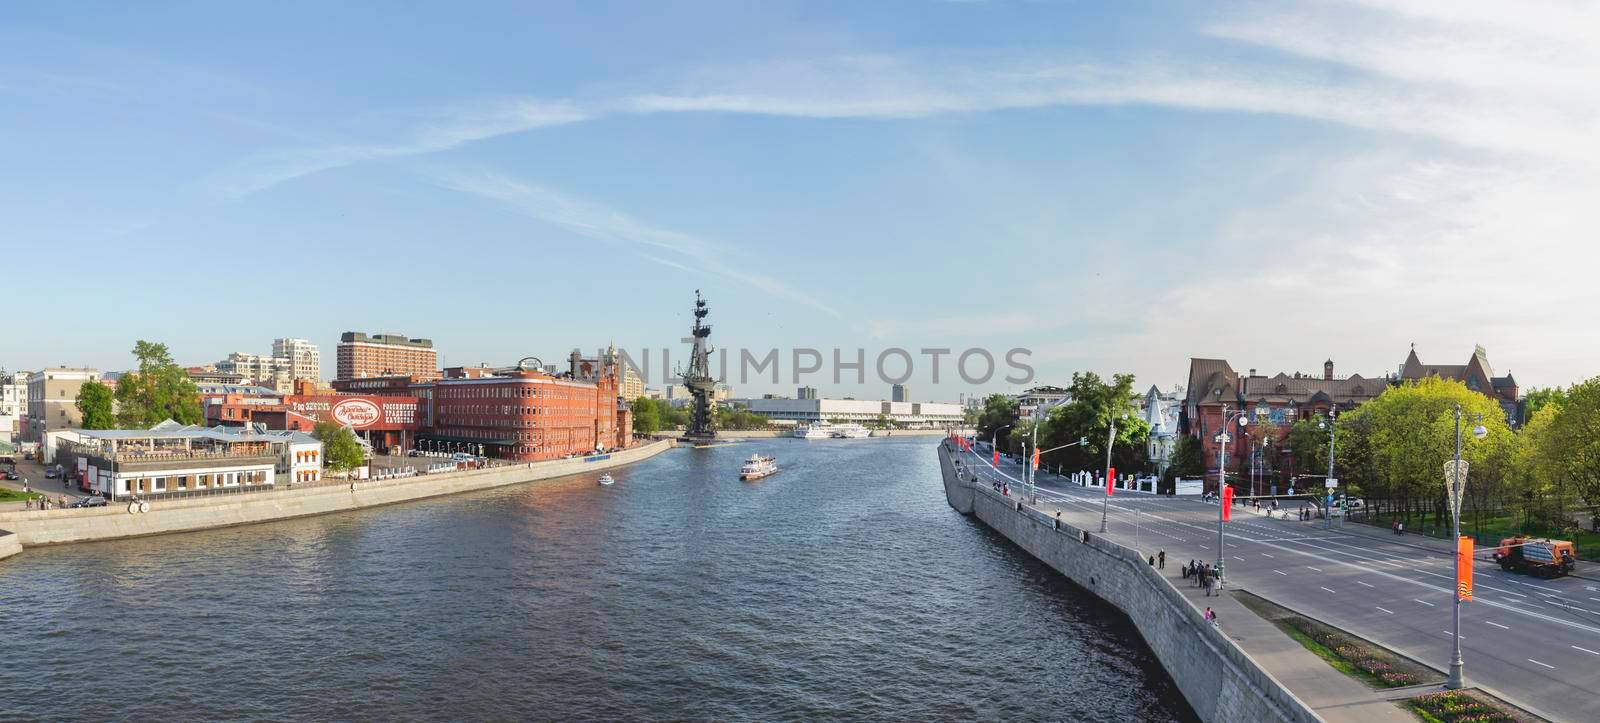 MOSCOW, RUSSIA - May 9, 2015. Panorama view Patriarshiy bridge. Monument to Russian emperor Peter the Great by Zurab Tseretely, Red October factory, Central House of Artists.